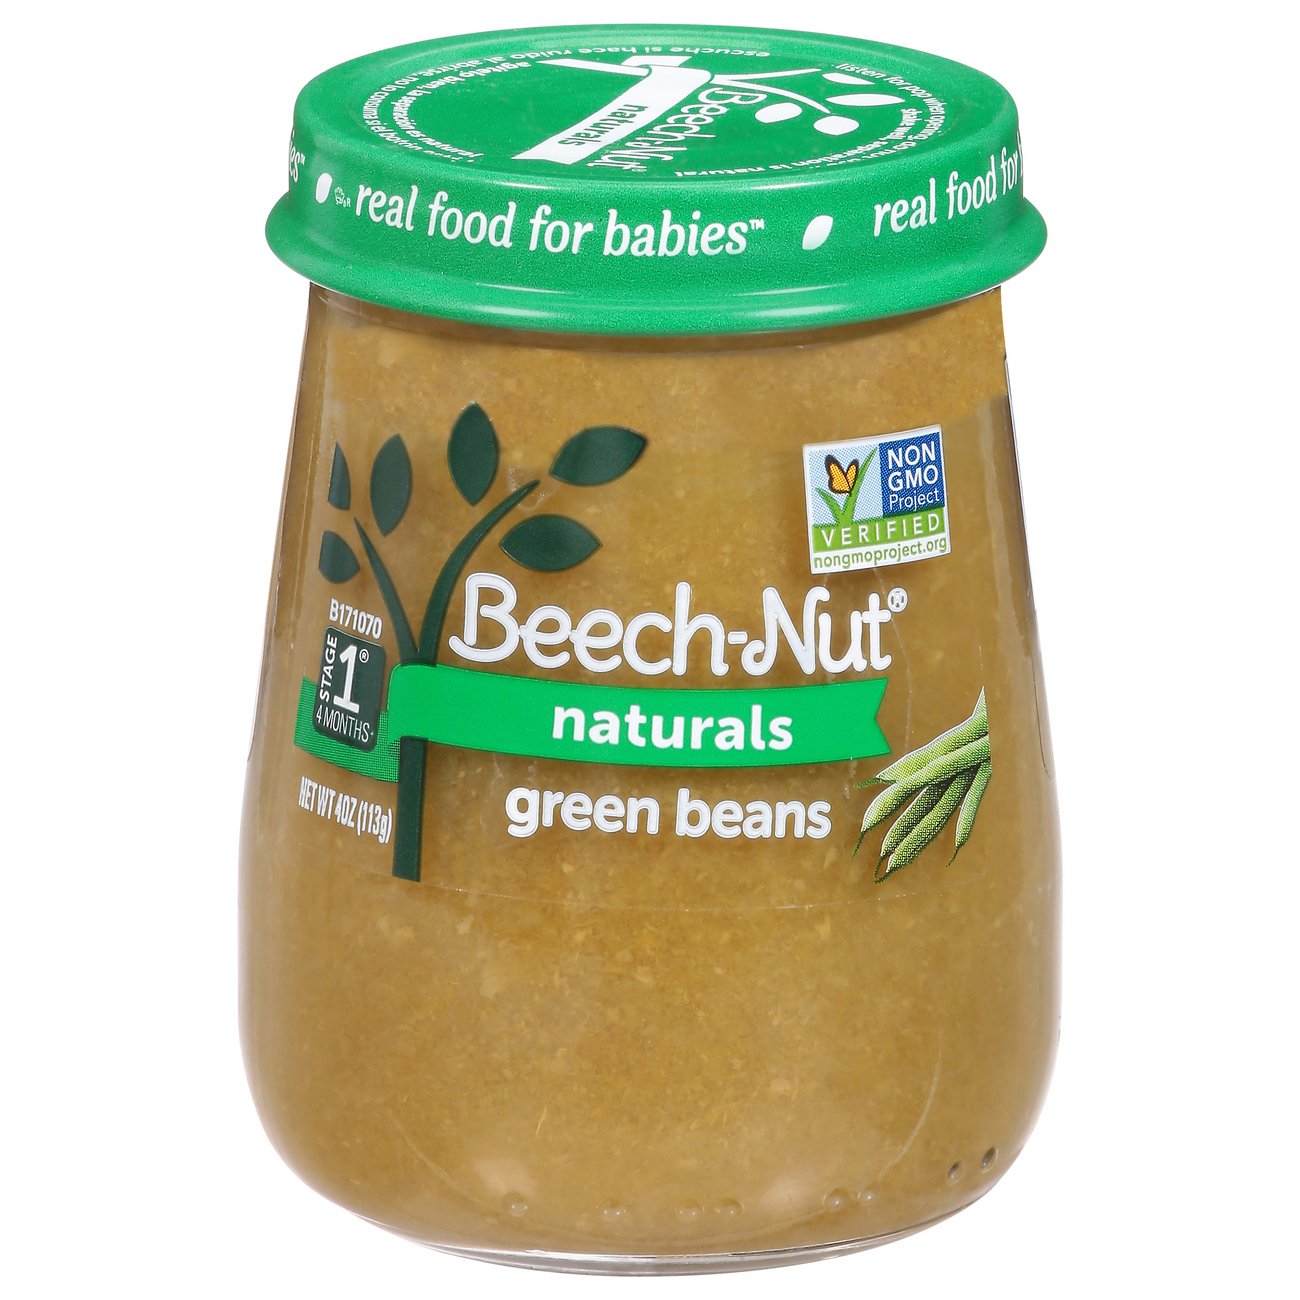 BeechNut Naturals Stage 1 Baby Food Green Beans Shop Baby Food at